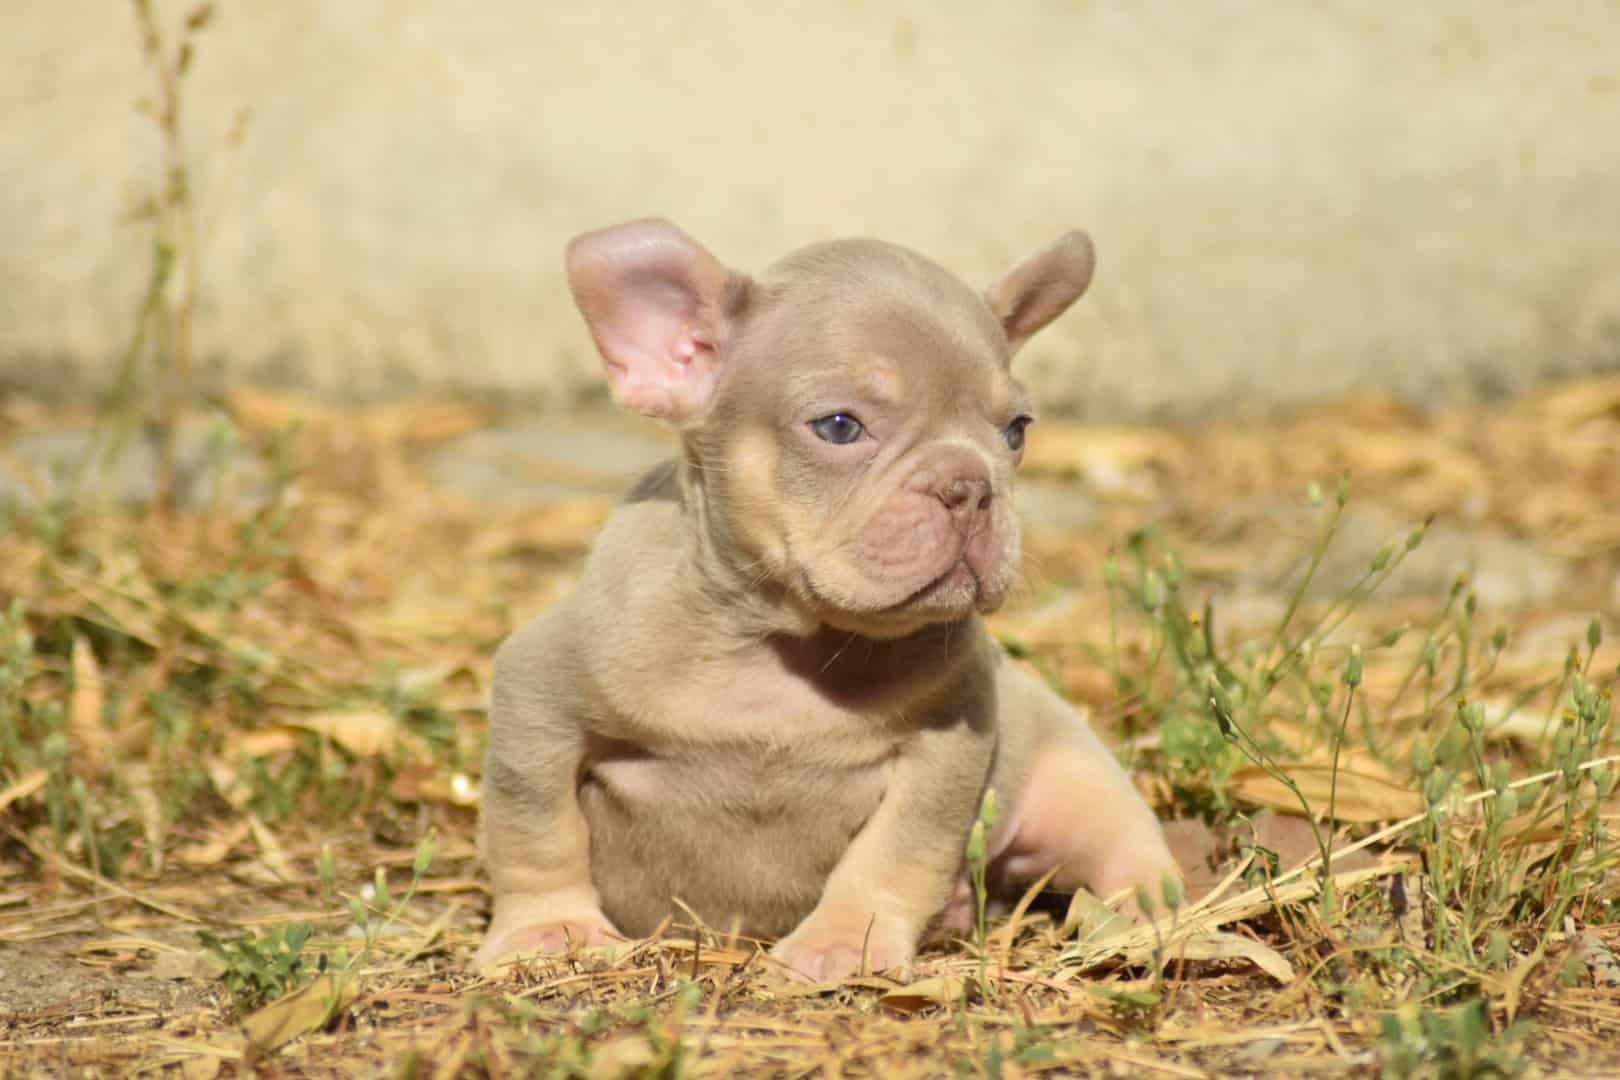 Chiot mâle bouledogue français exotique isabella tan new shade french bulldog frenchie exotic aux yeux verts